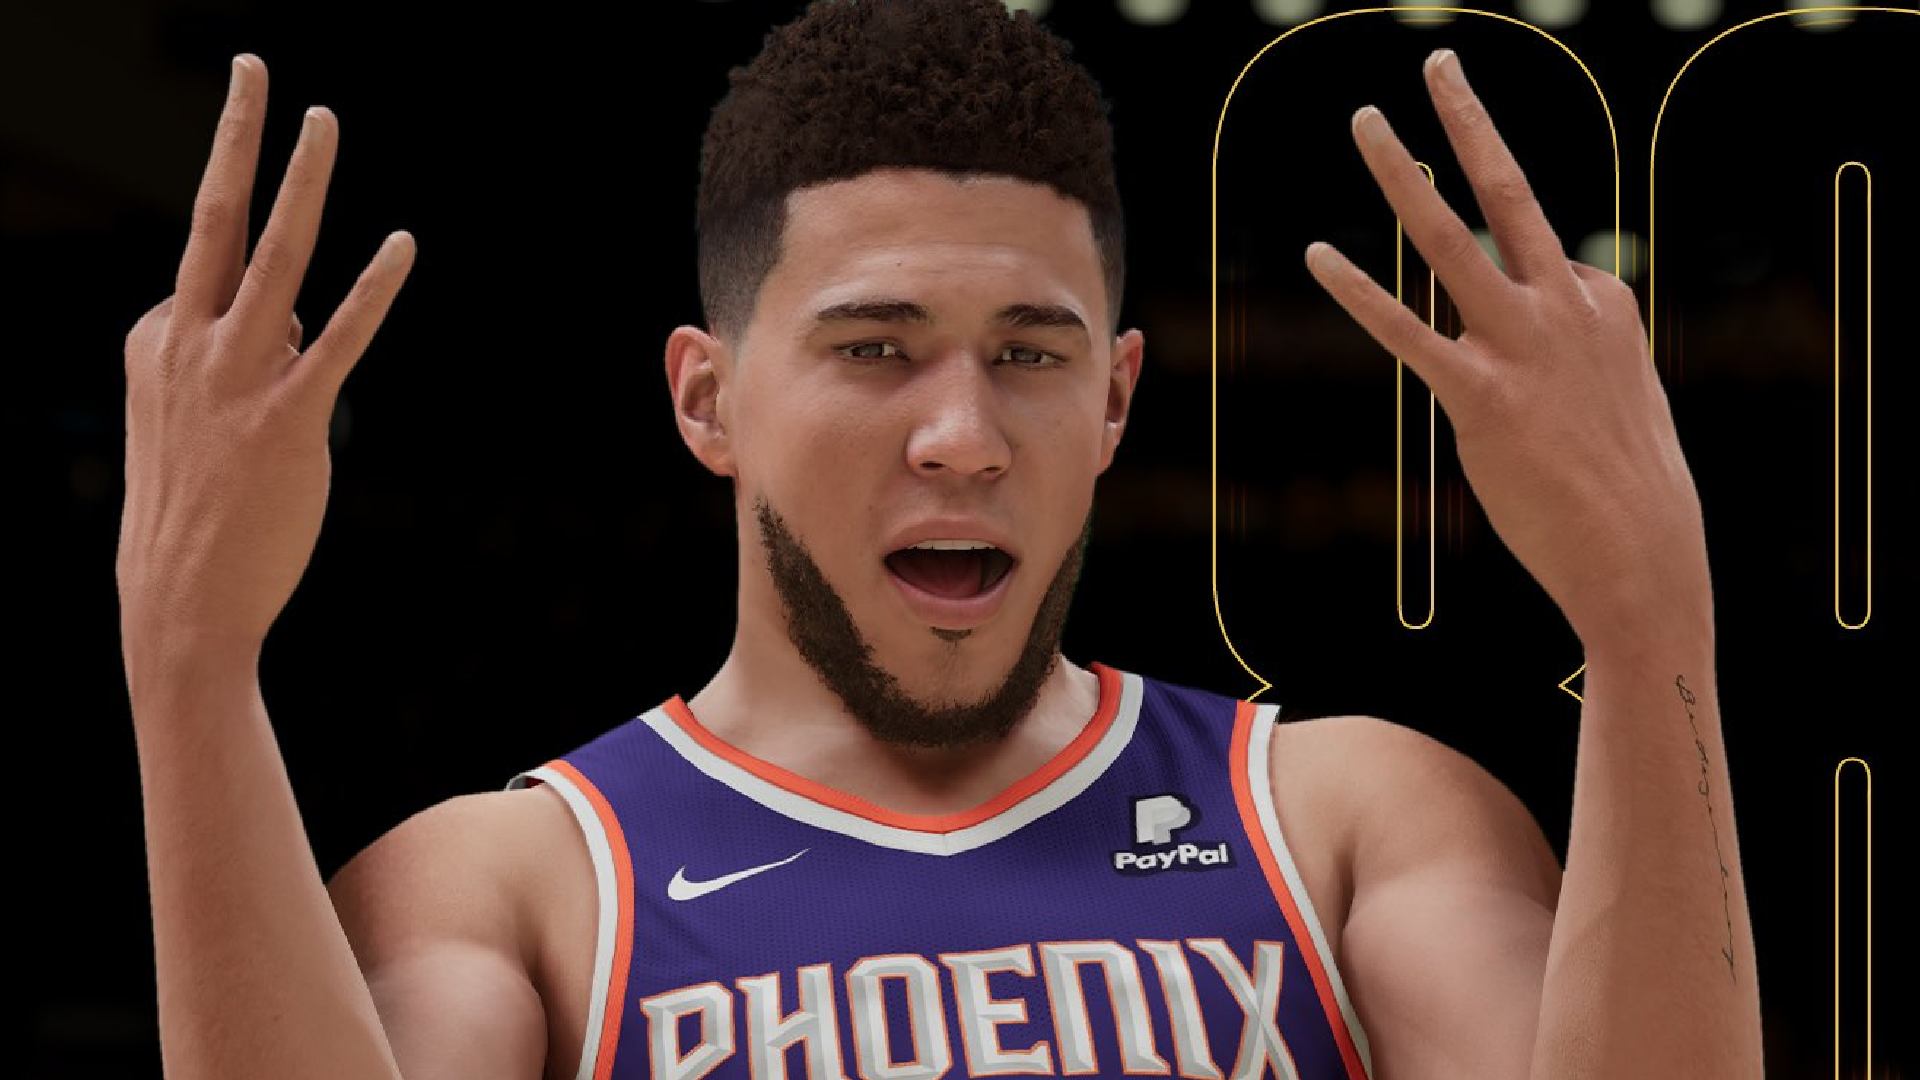 NBA 2K on X: #2KDay Giveaway 🔥 A jersey from our Cover Athlete on the  line. Reply with #2KDay and #giveaway for a chance to win a Devin Booker  Jersey. Rules ➡️